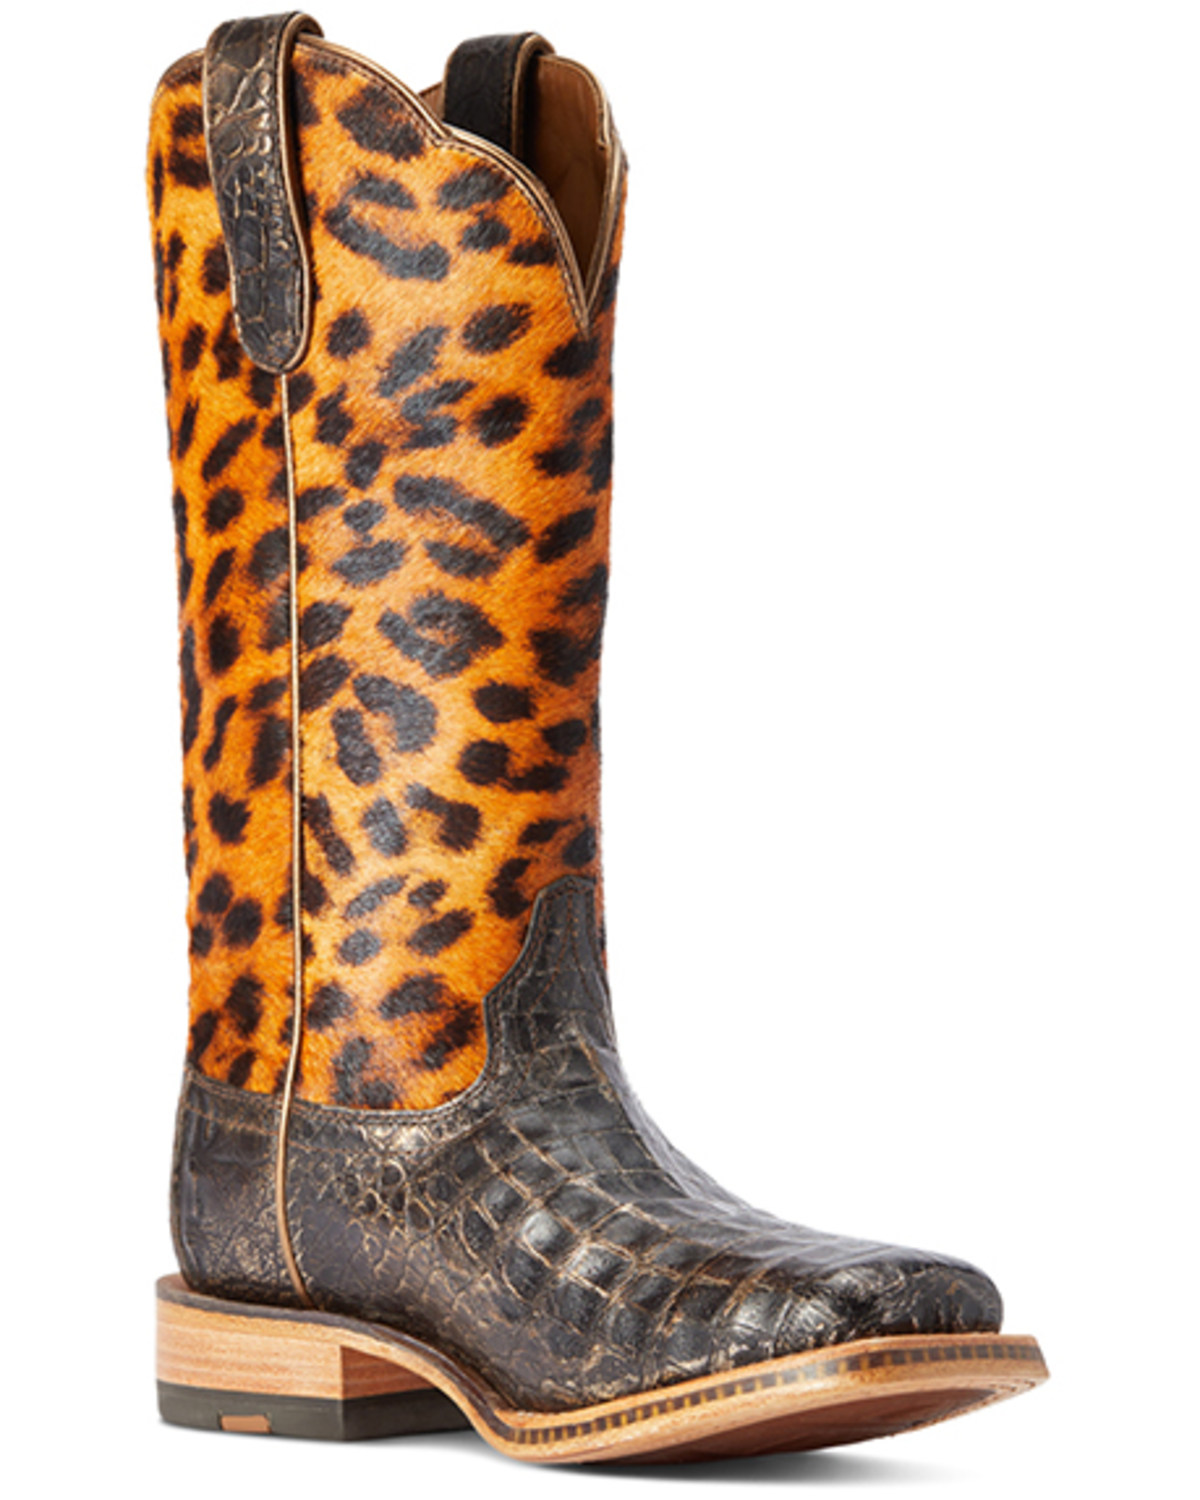 Ariat Women's Donatella Exotic Caiman Western Boots - Broad Square Toe